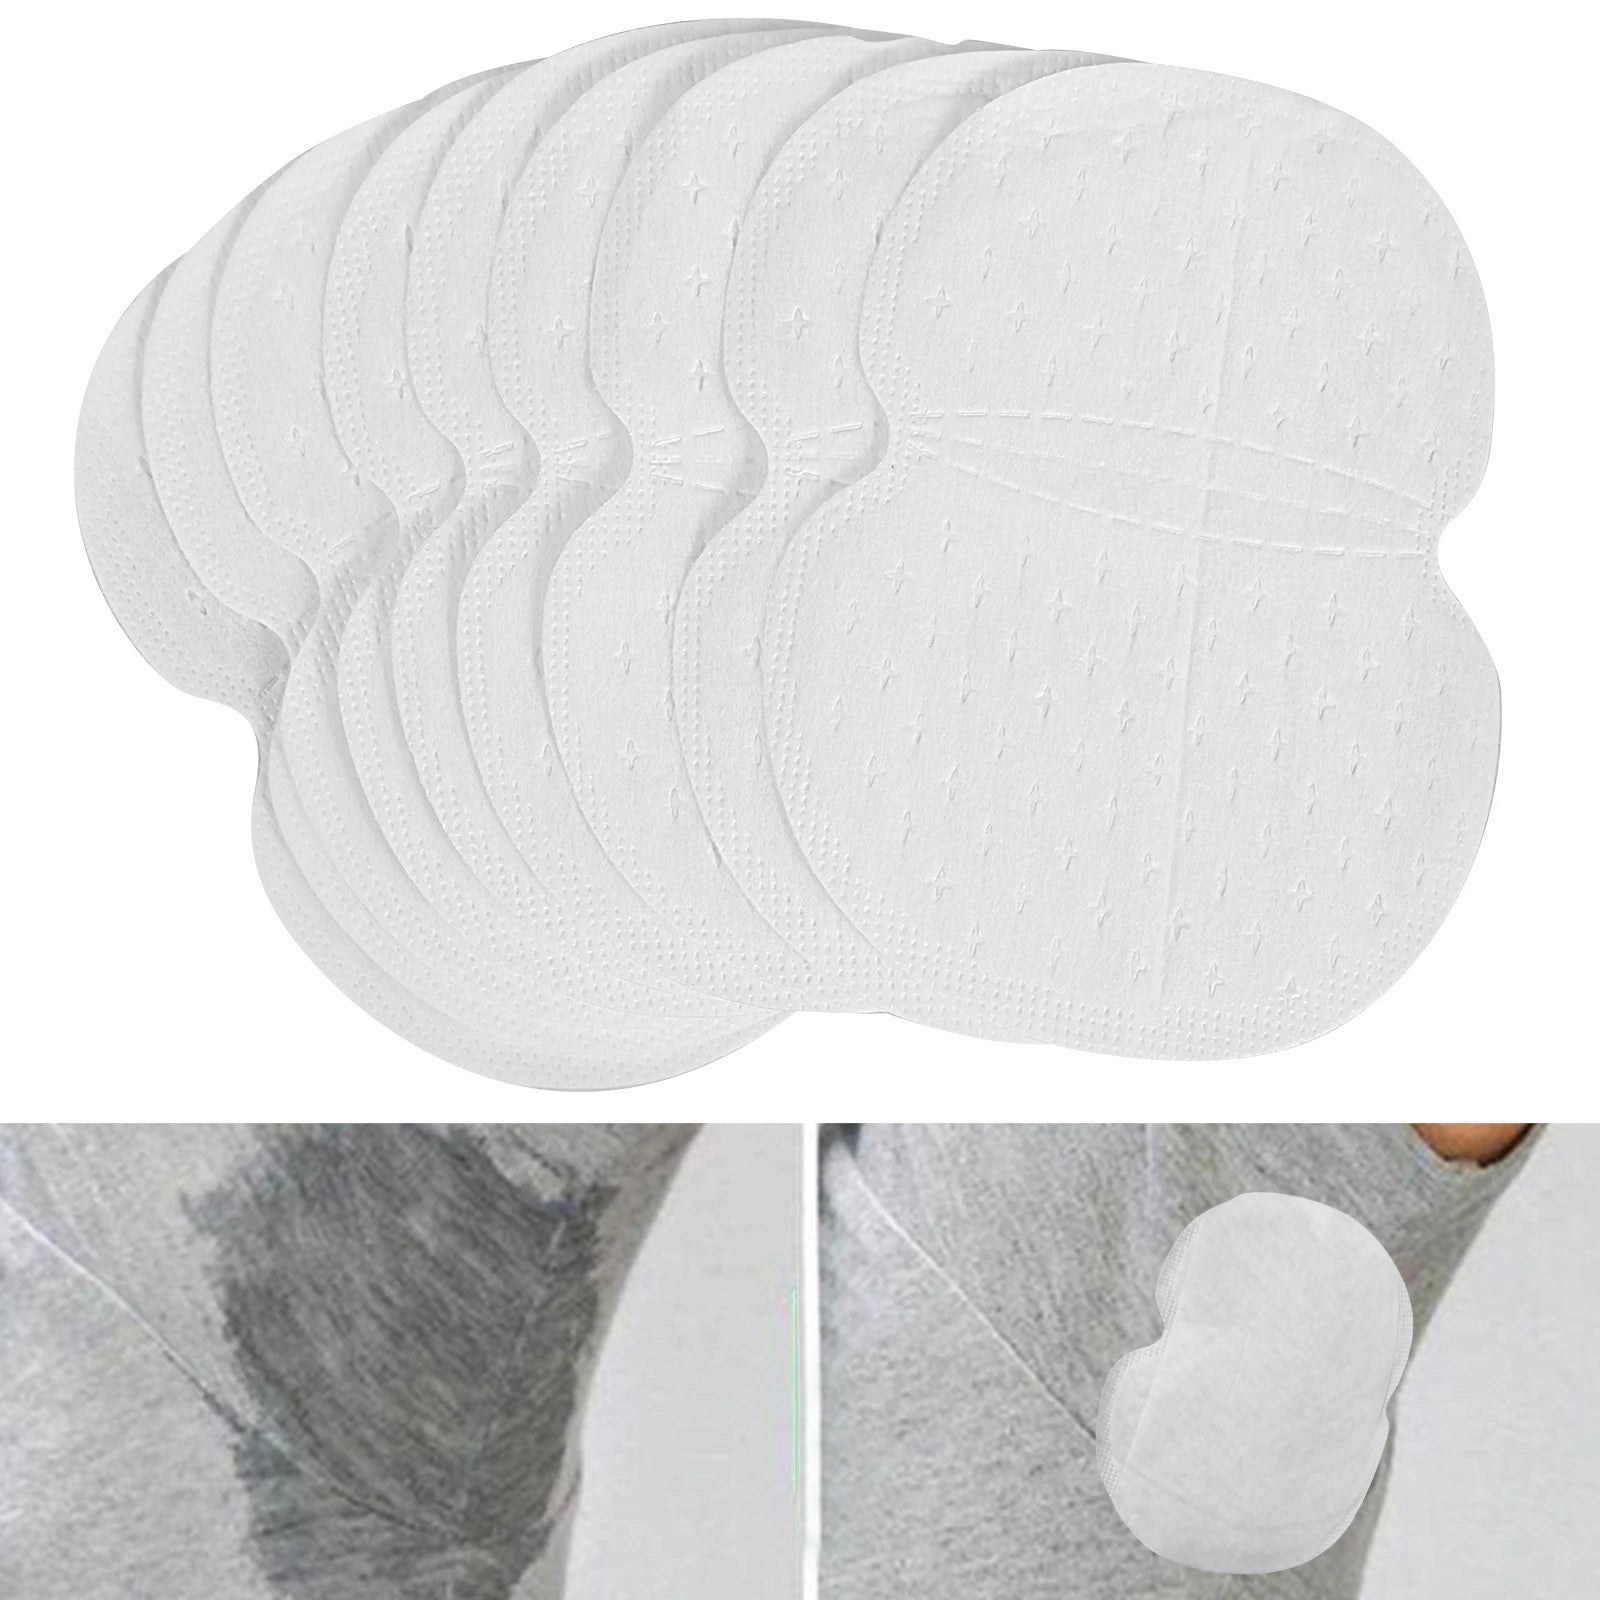 100/300Pcs Disposable Underarm Armpit Sweat Pads Sweat-absorbing Patch Summer Deodorants Non-woven Pads Breathable Ultra-thin